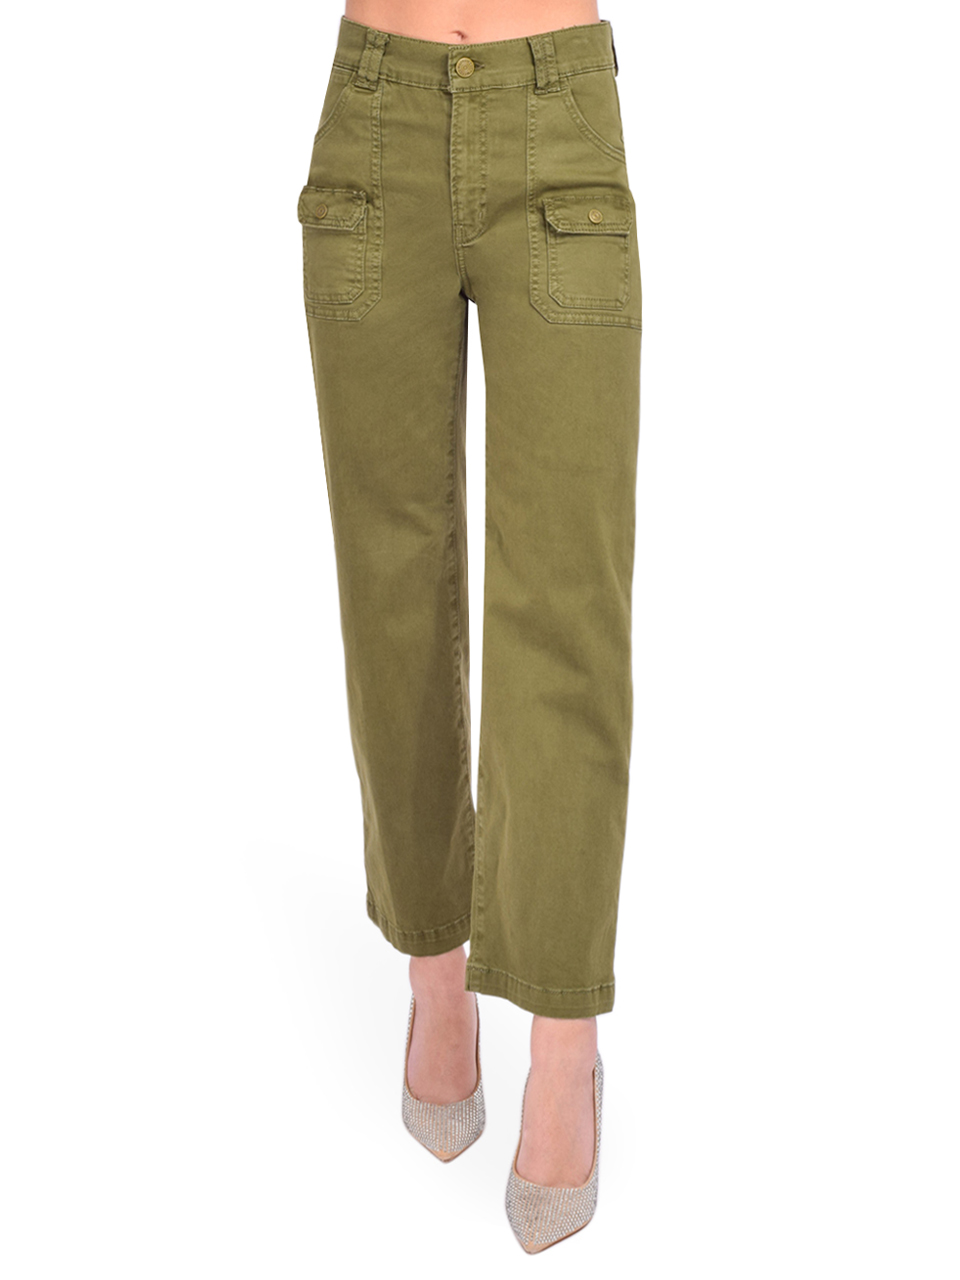 FRAME Utility Pocket Pant in Washed Winter Green Front View 